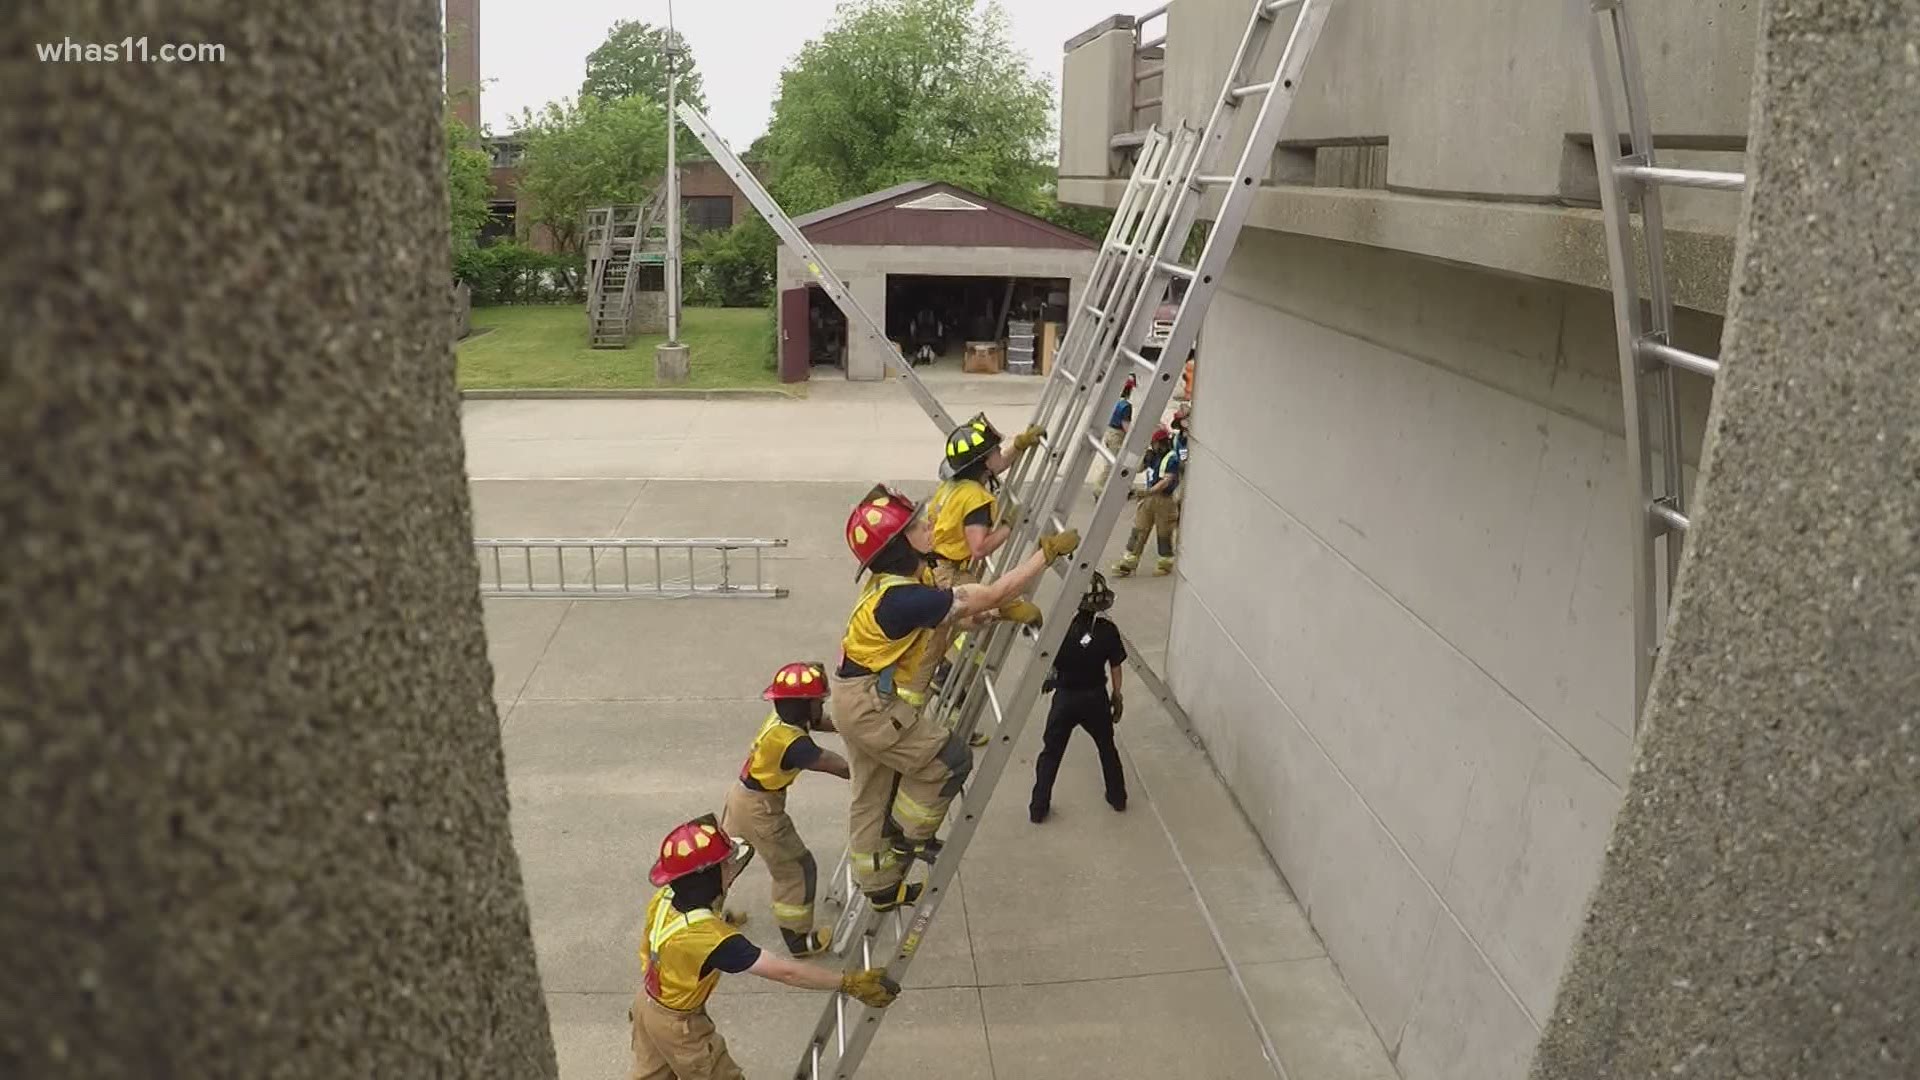 There are currently 60 recruits going through several weeks of training to be a firefighter in Louisville.